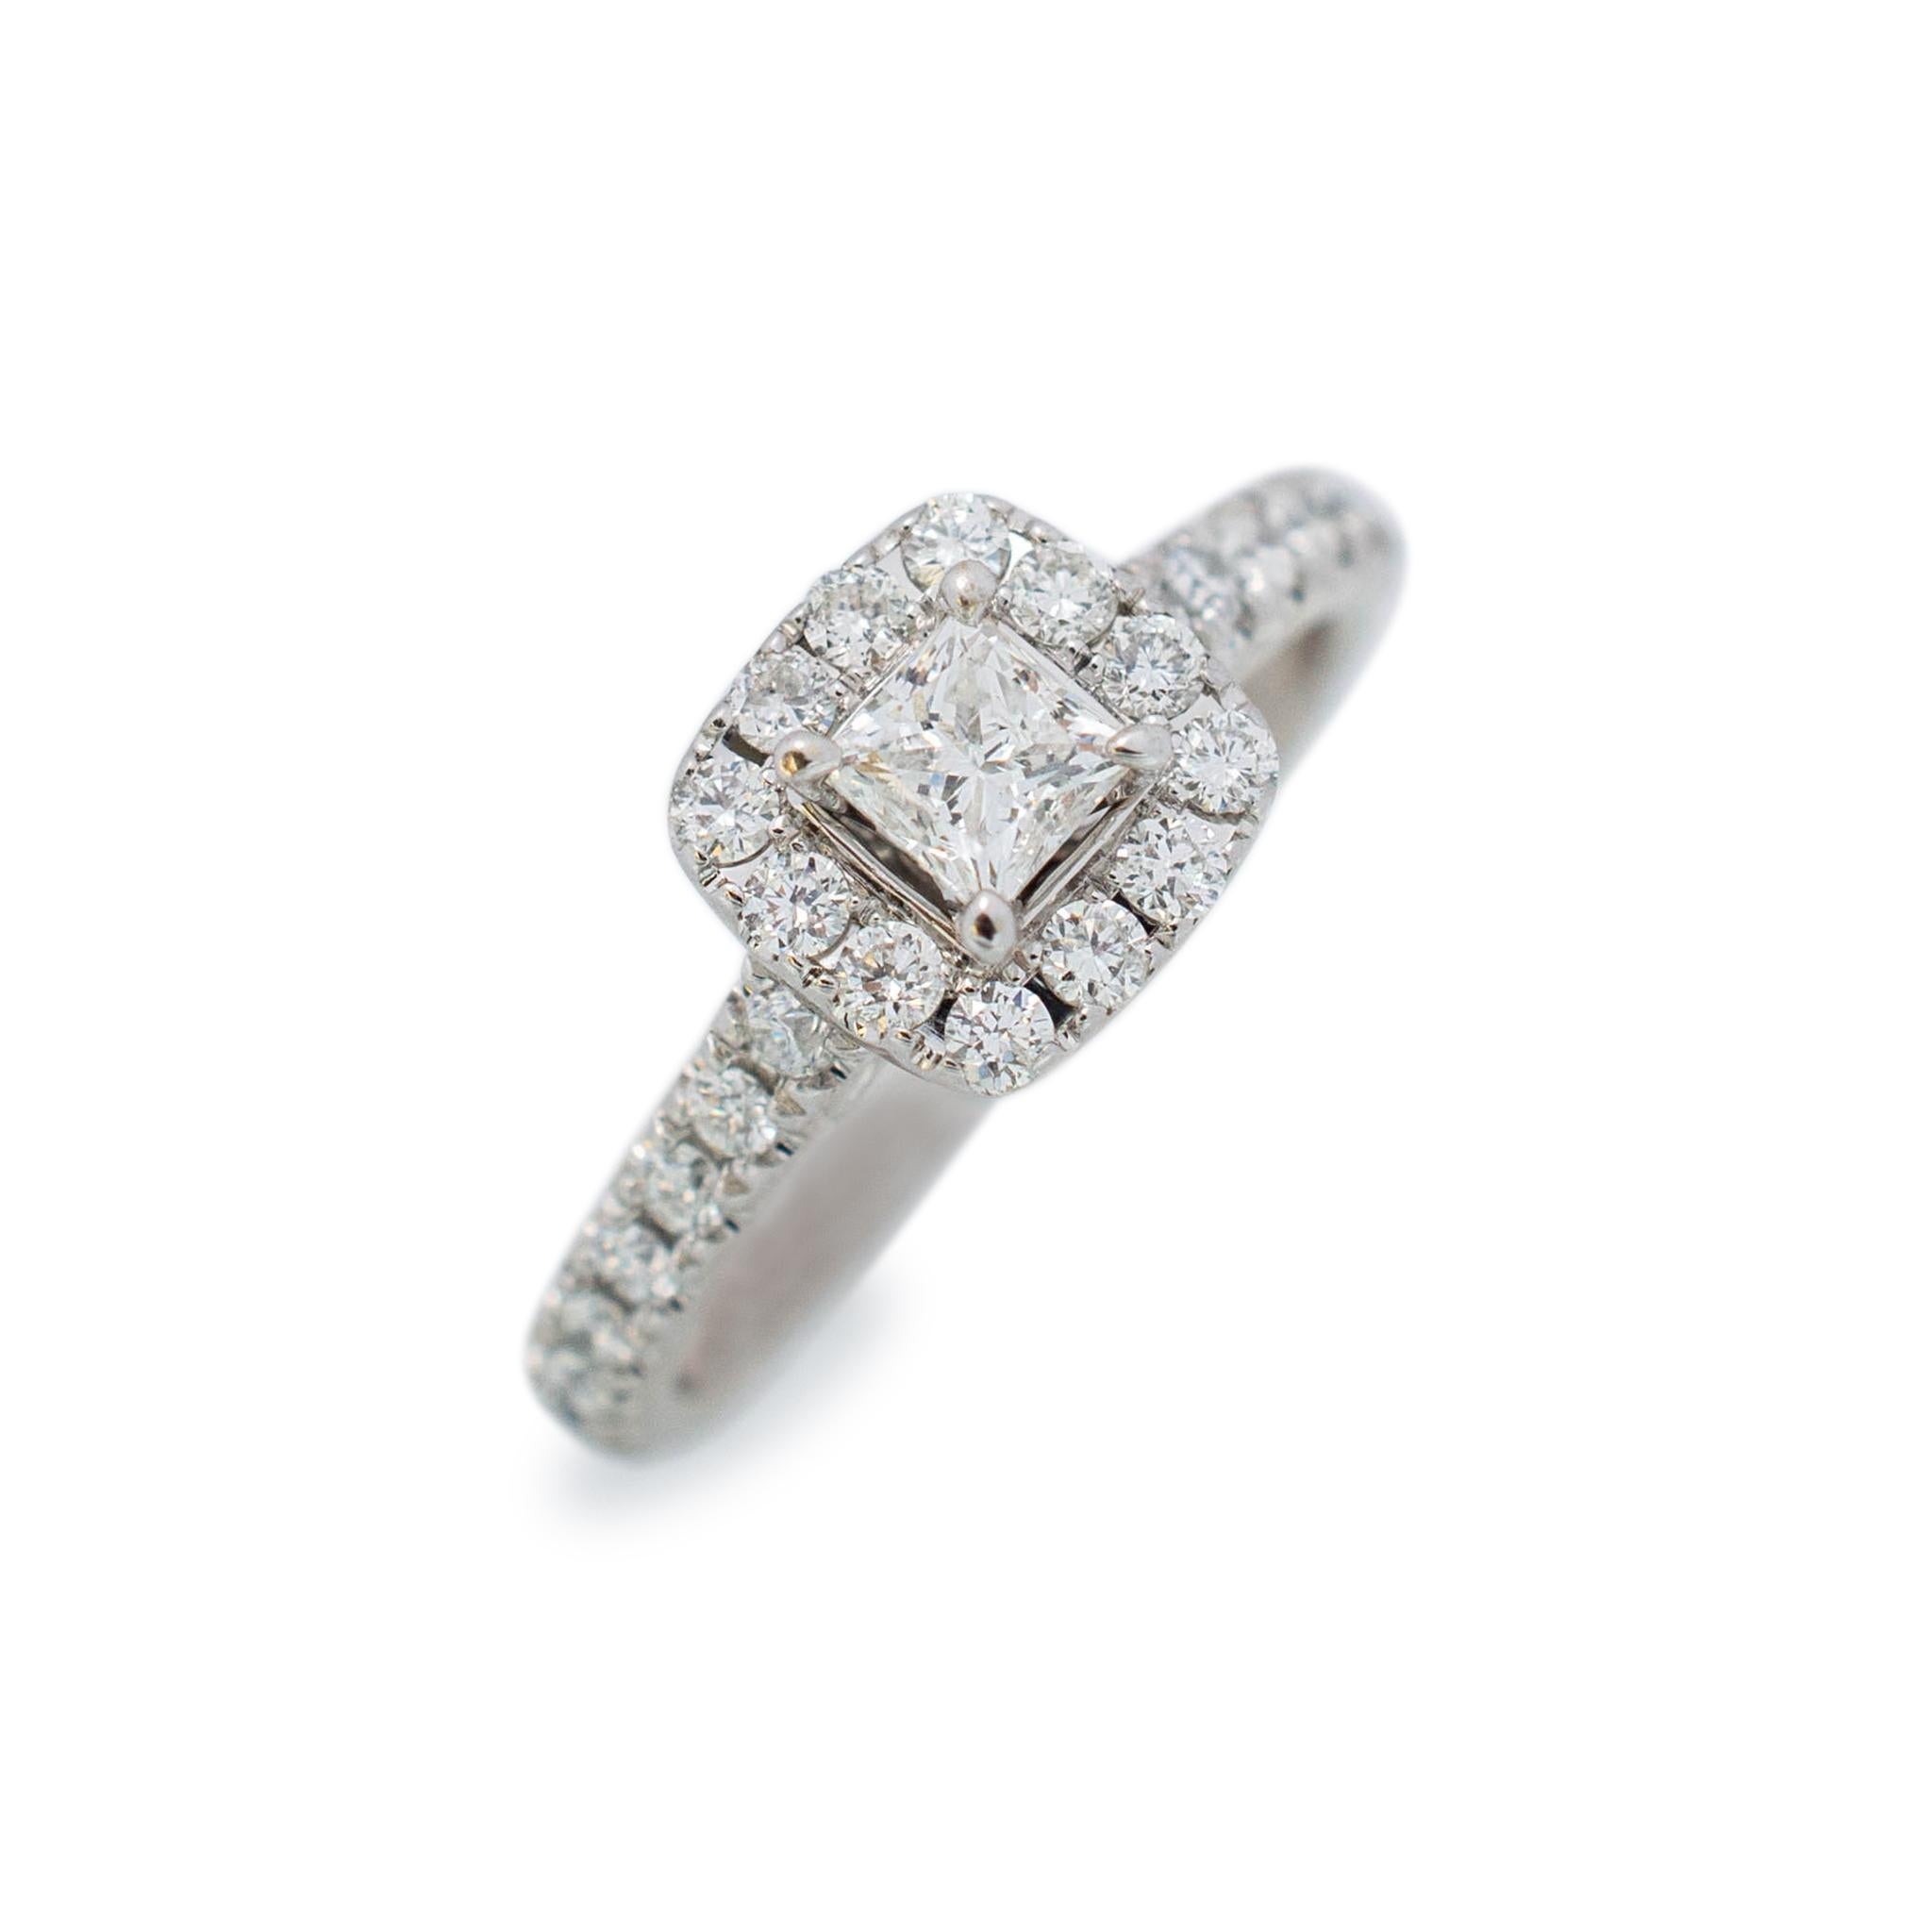 Gender: Ladies

Material: 14K White Gold

Size: 5

head measurements: 7.80mm x 8.20mm

Shank Width: 2.40mm

Ladies 14K white gold diamond engagement halo ring with a half round shank.
Pre-owned in excellent condition. Might show minor signs of